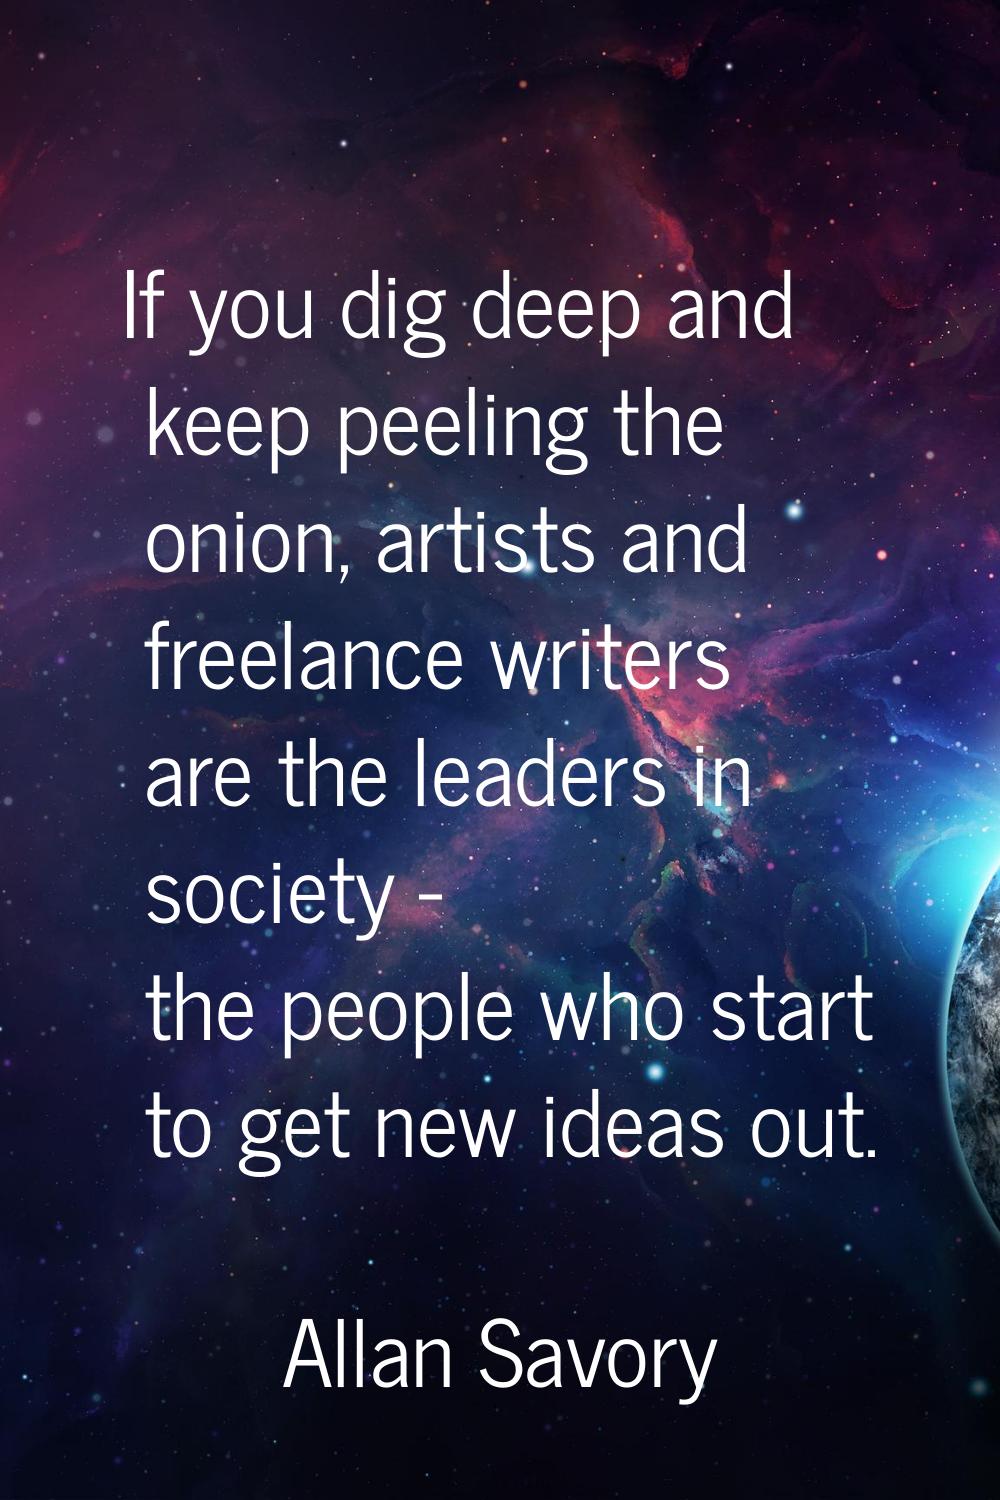 If you dig deep and keep peeling the onion, artists and freelance writers are the leaders in societ